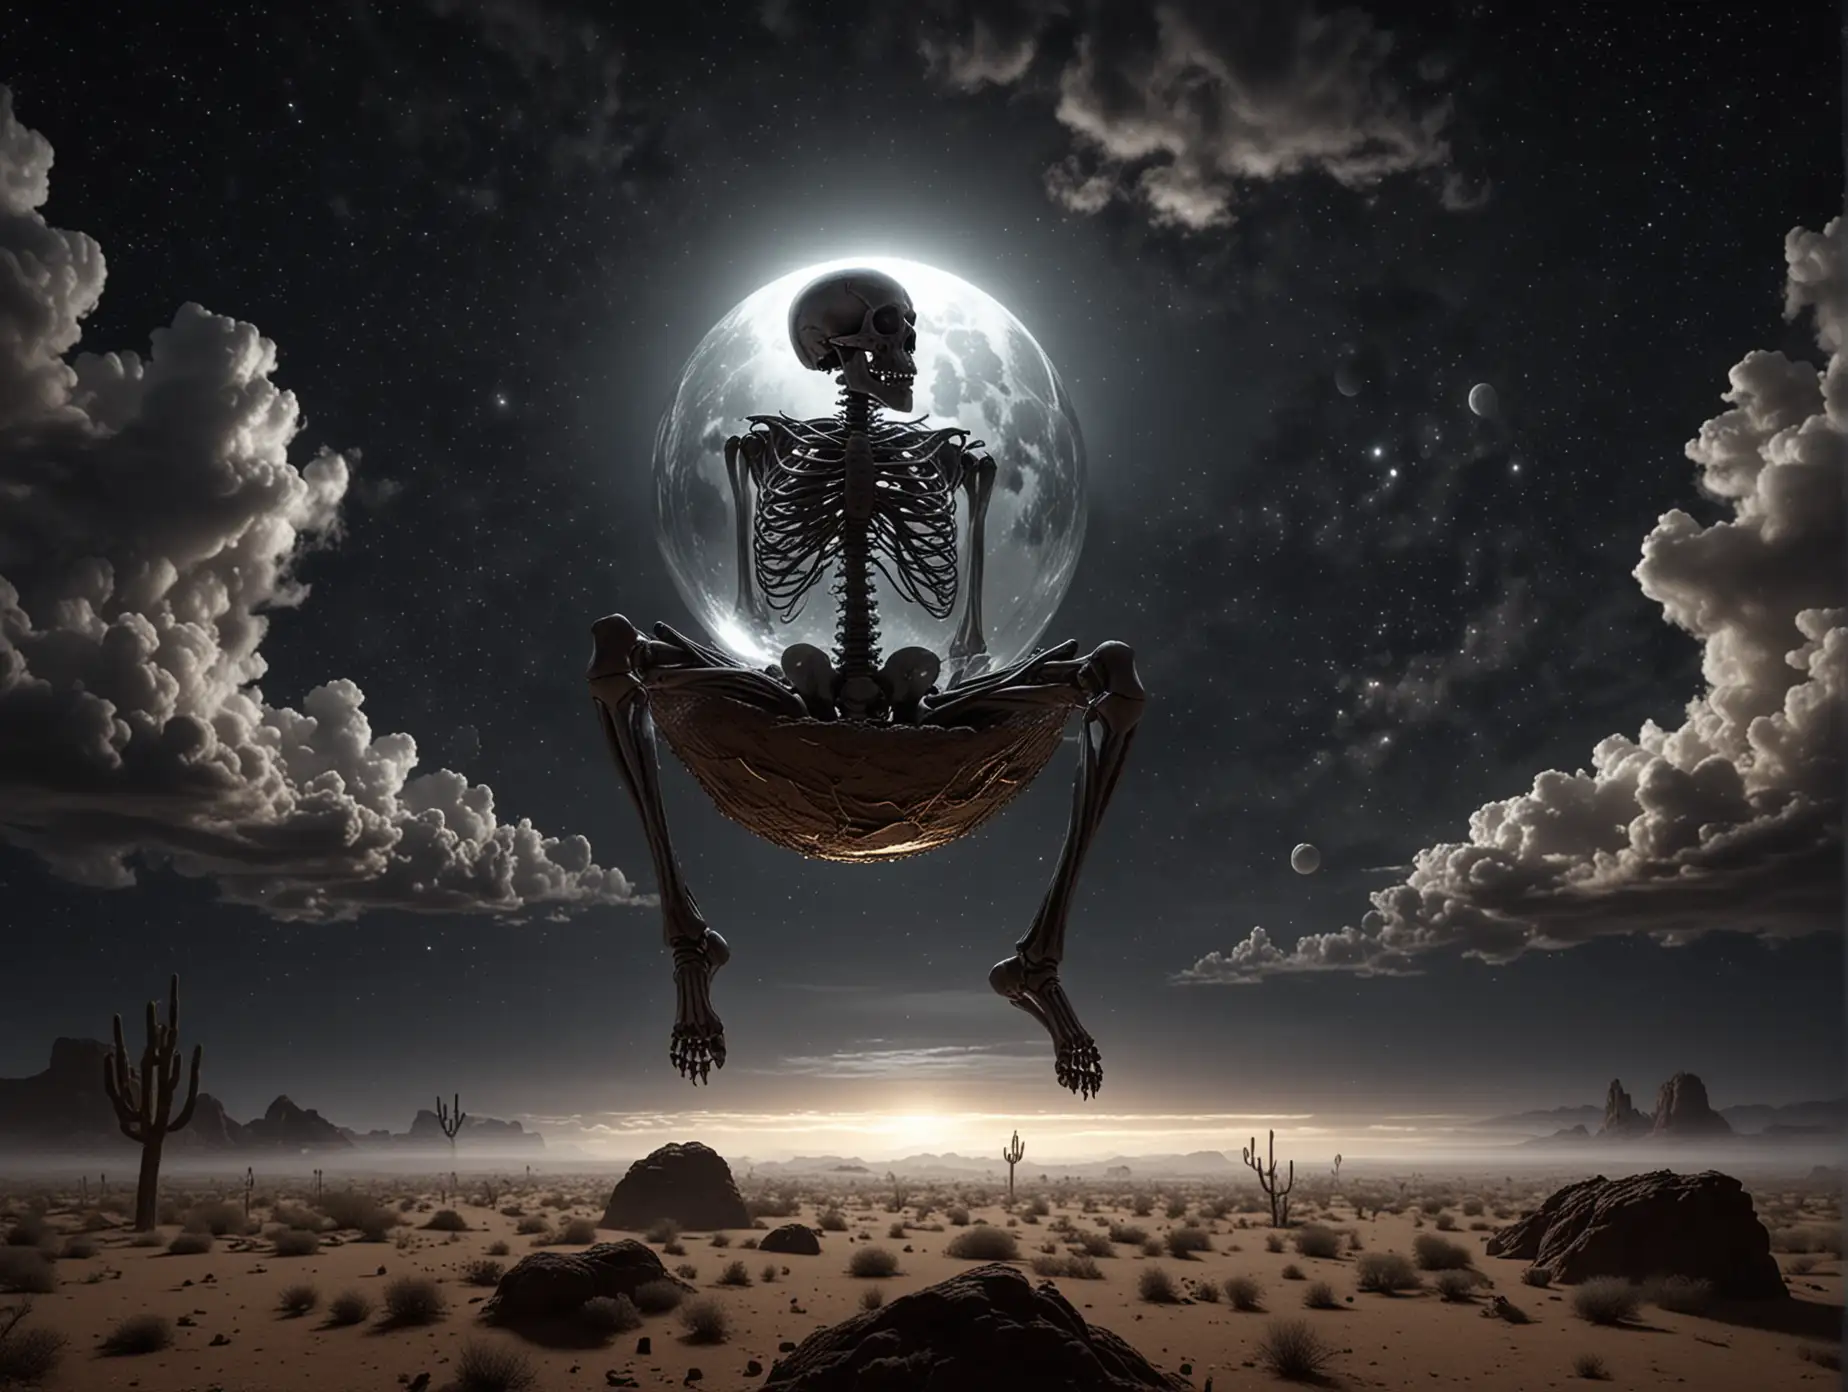 ULTRA REALISTIC high definition, one skeleton is flying high through the night skies of the Sonoran desert, sitting on its silver ball, full body, it flies among the clouds, riding its orb (ball) between its legs and sitting on it with it between its thighs (skeleton grips the ball with its thighs) flying high through the night sky racing through the clouds on a dark moonlit night with the orb tightly gripped between its legs, in cinematic lighting